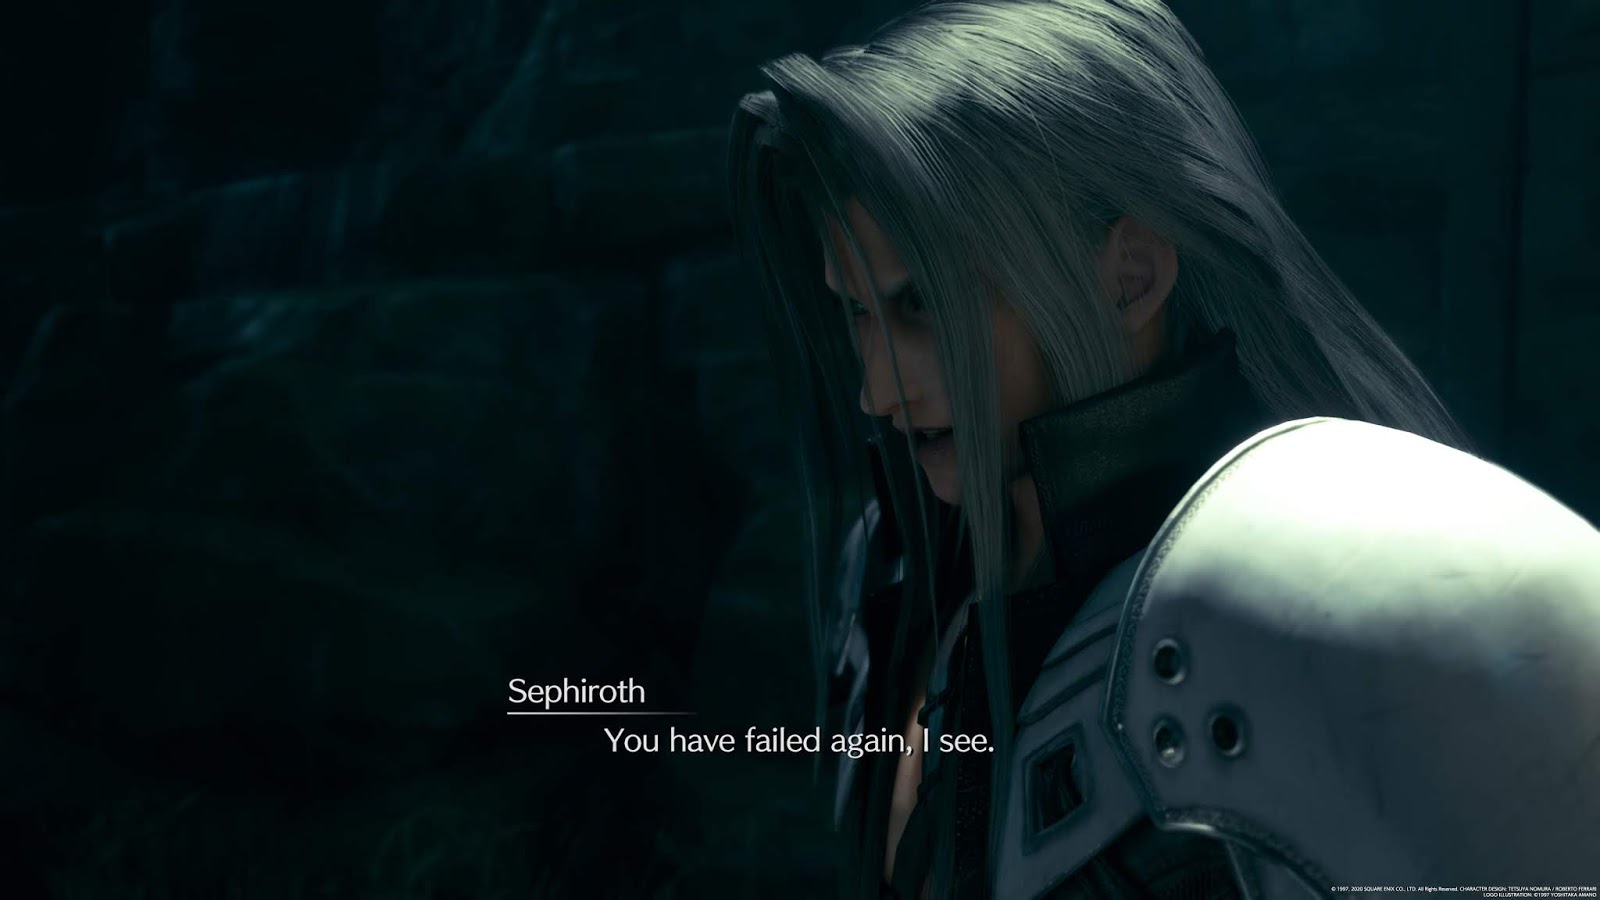 Sephiroth was watching all of this? 